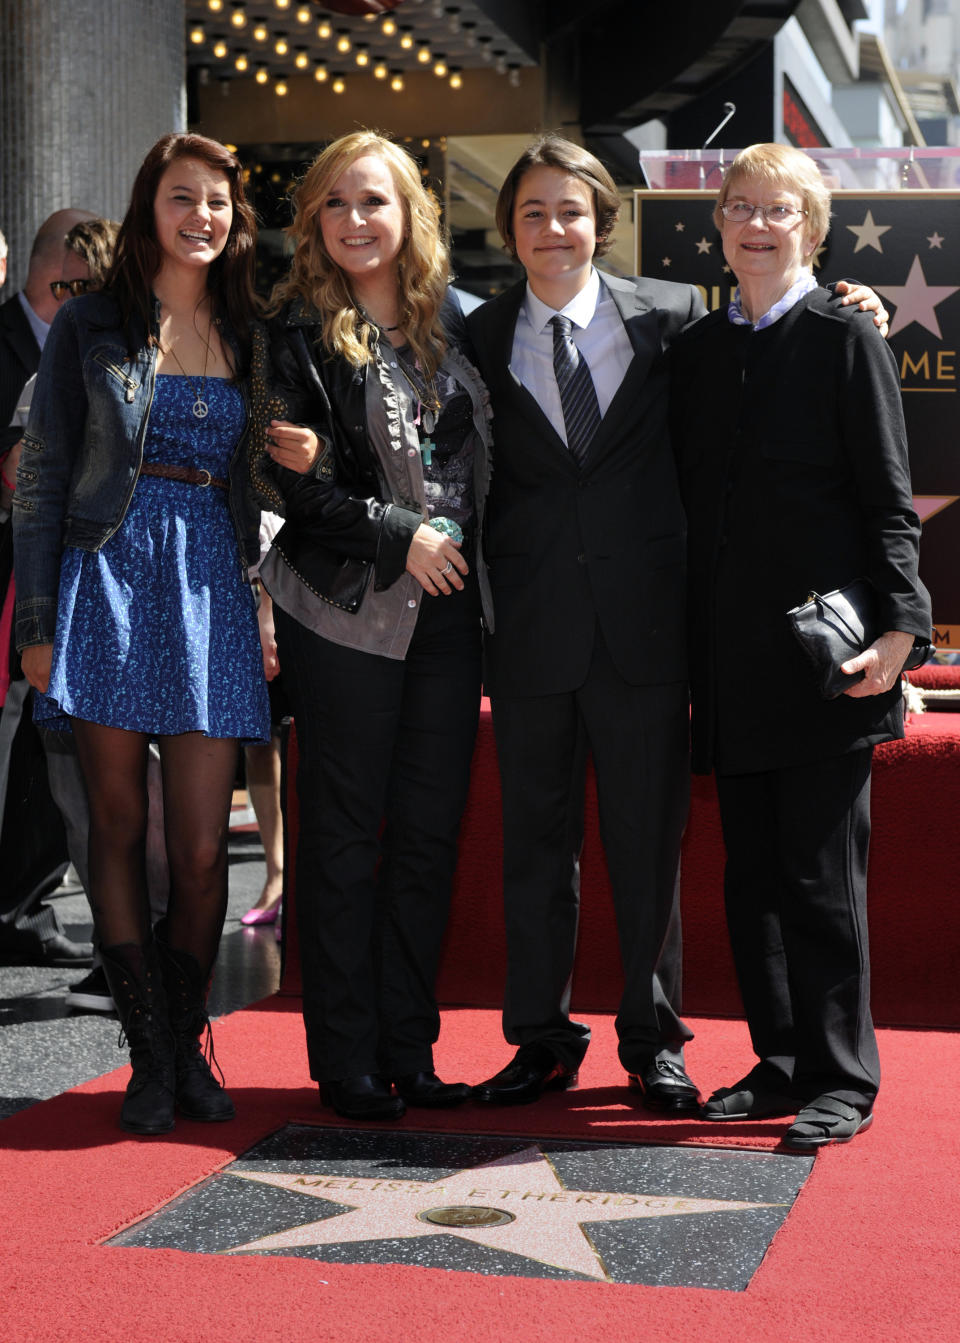 Melissa Etheridge (2nd L) poses with daughter Bailey (L), son Beckett (2nd R) and mother Elizabeth at a ceremony where the singer and songwriter received a star on the Hollywood Walk of Fame in Los Angeles September 27, 2011. REUTERS/Phil McCarten (UNITED STATES - Tags: ENTERTAINMENT)